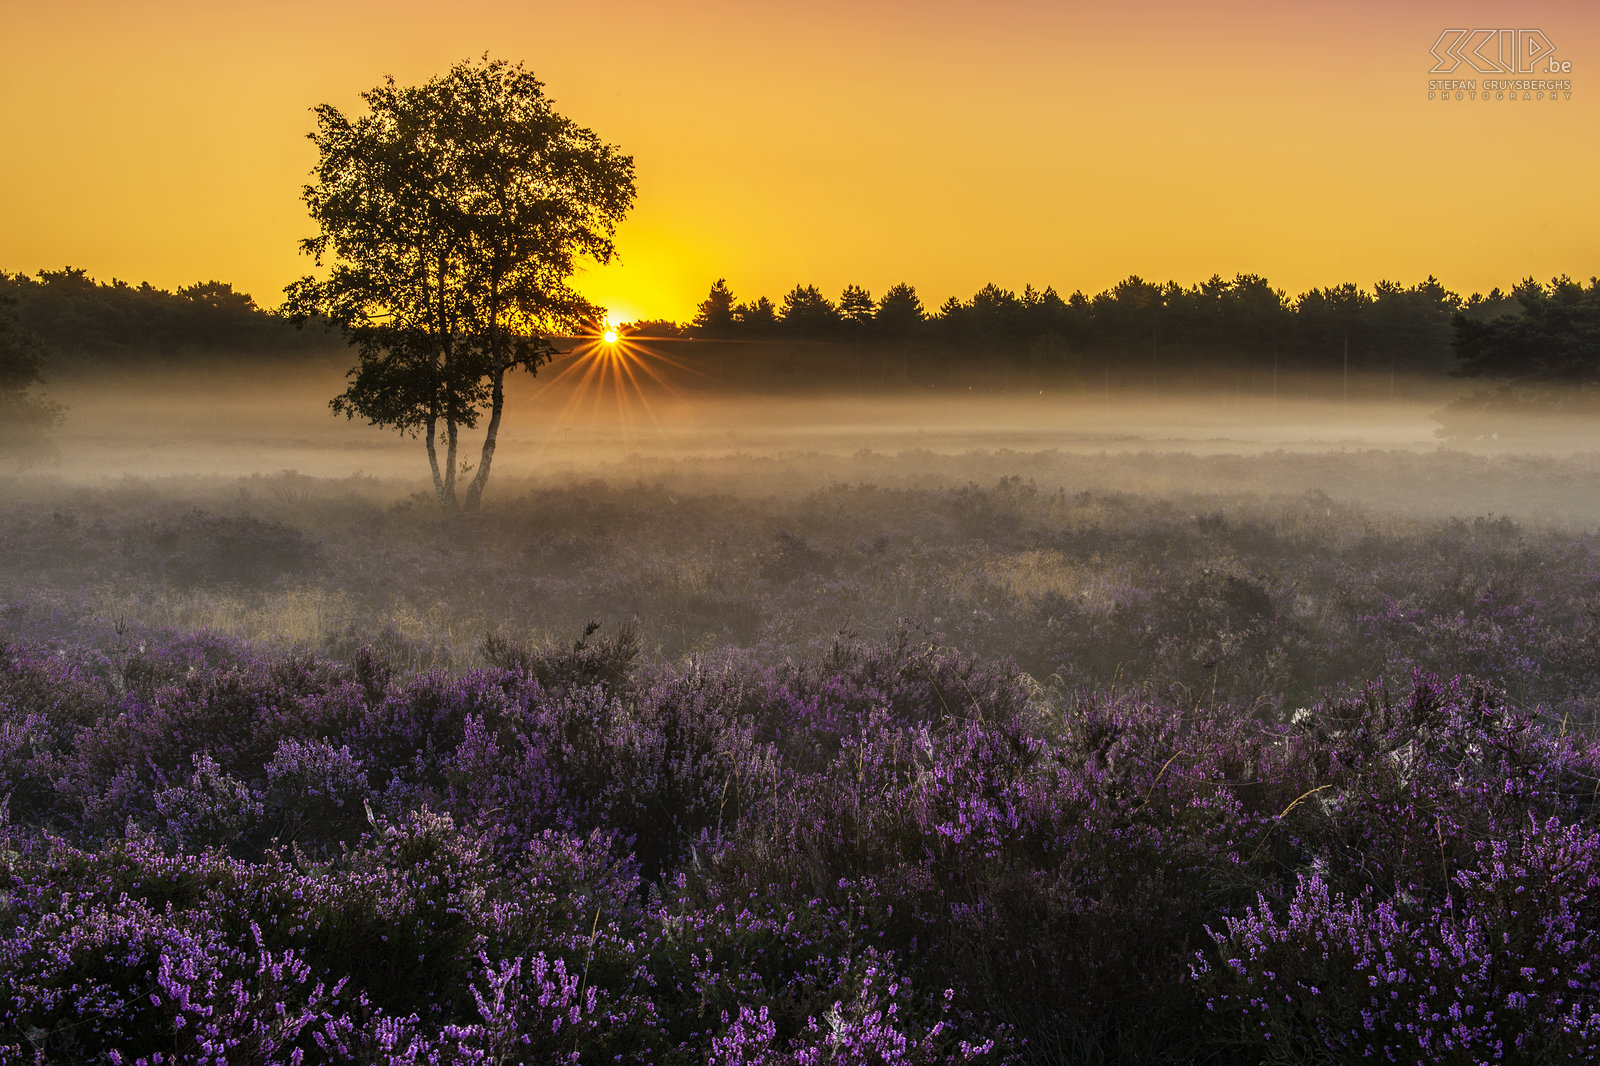 Sunset at Heuvelse Heide From mid-August the heather blooms in our nature reserves in the Kempen (region in Flanders). So a couple of days I woke up early to photograph the sunrise and the rich colour of the purple flowering heathland in my hometown Lommel at the Heuvelse Heide Stefan Cruysberghs